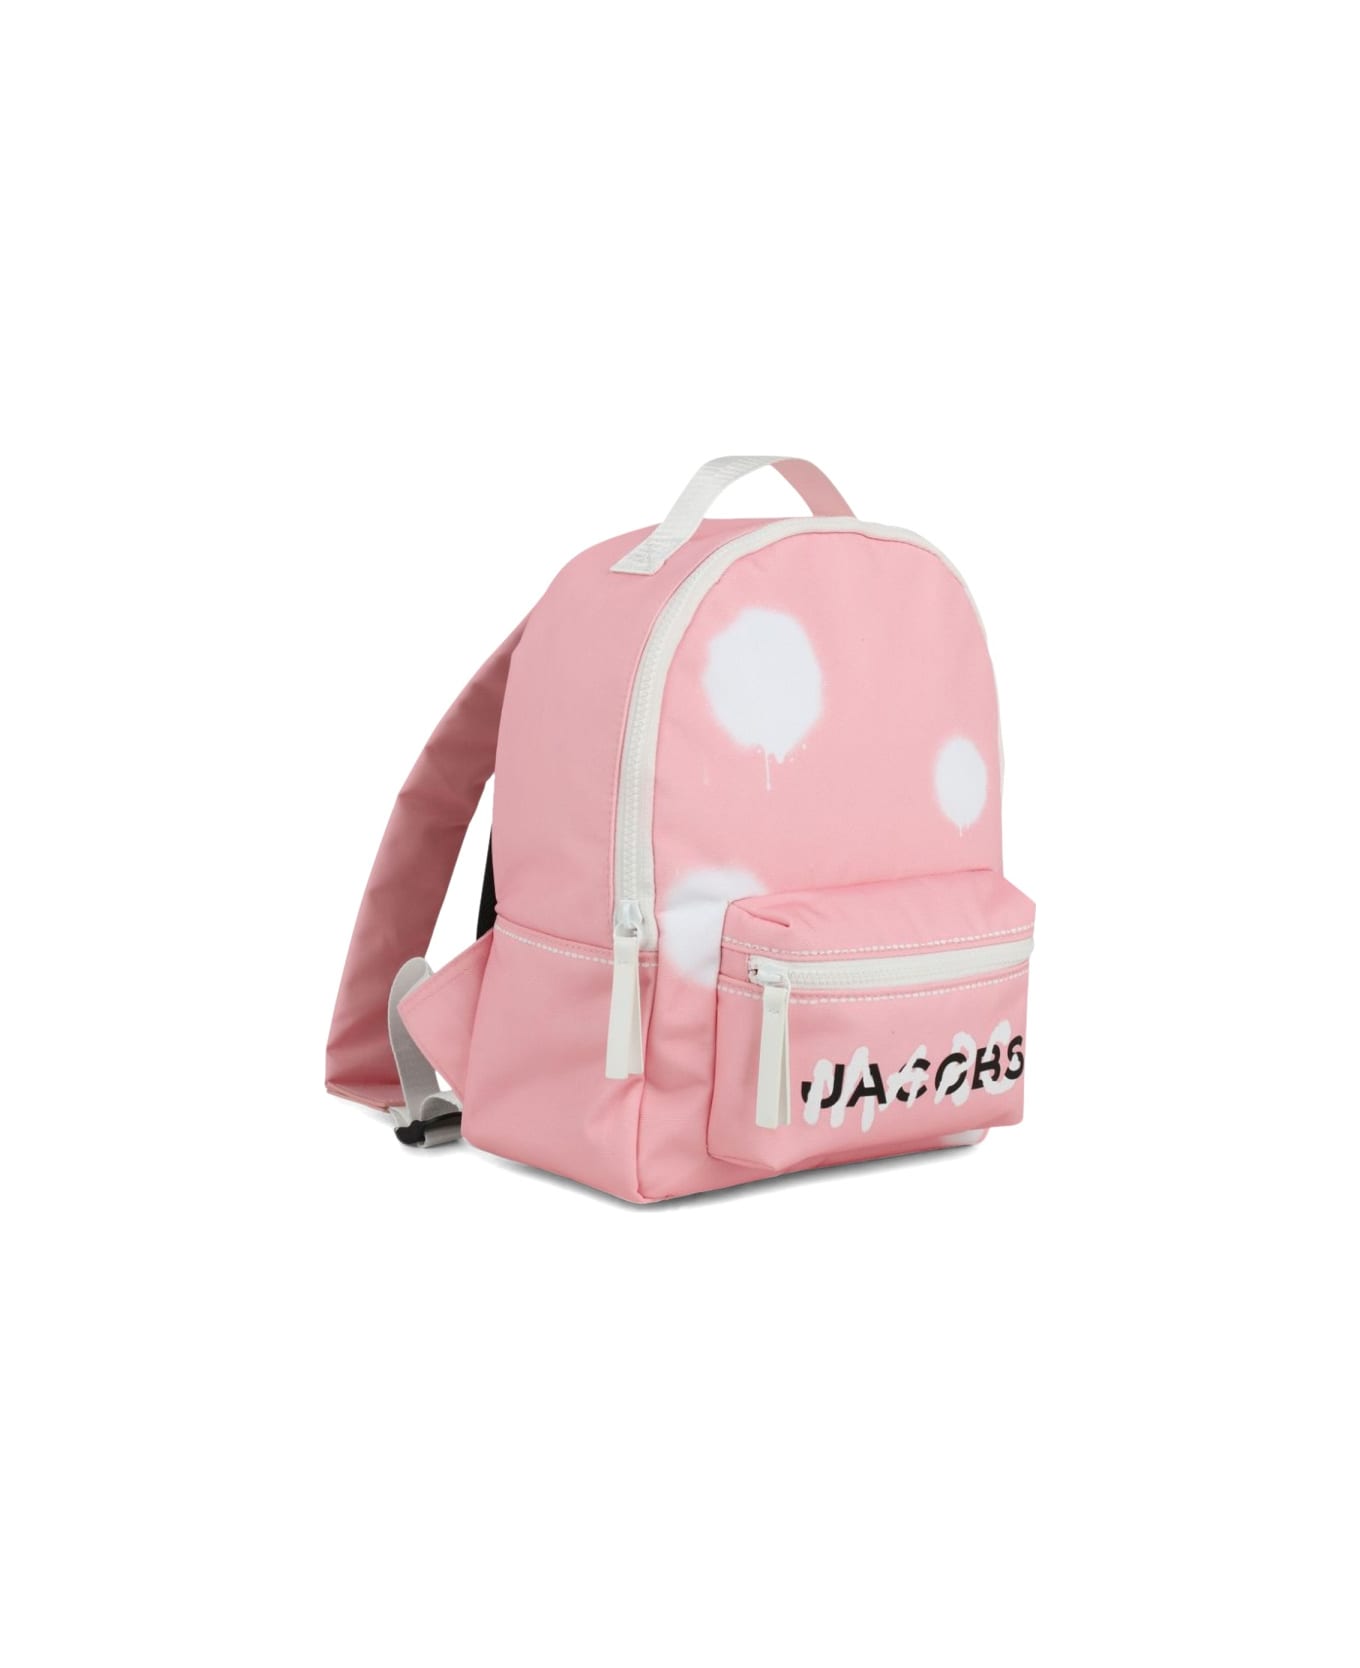 Marc Jacobs Backpack - PINK